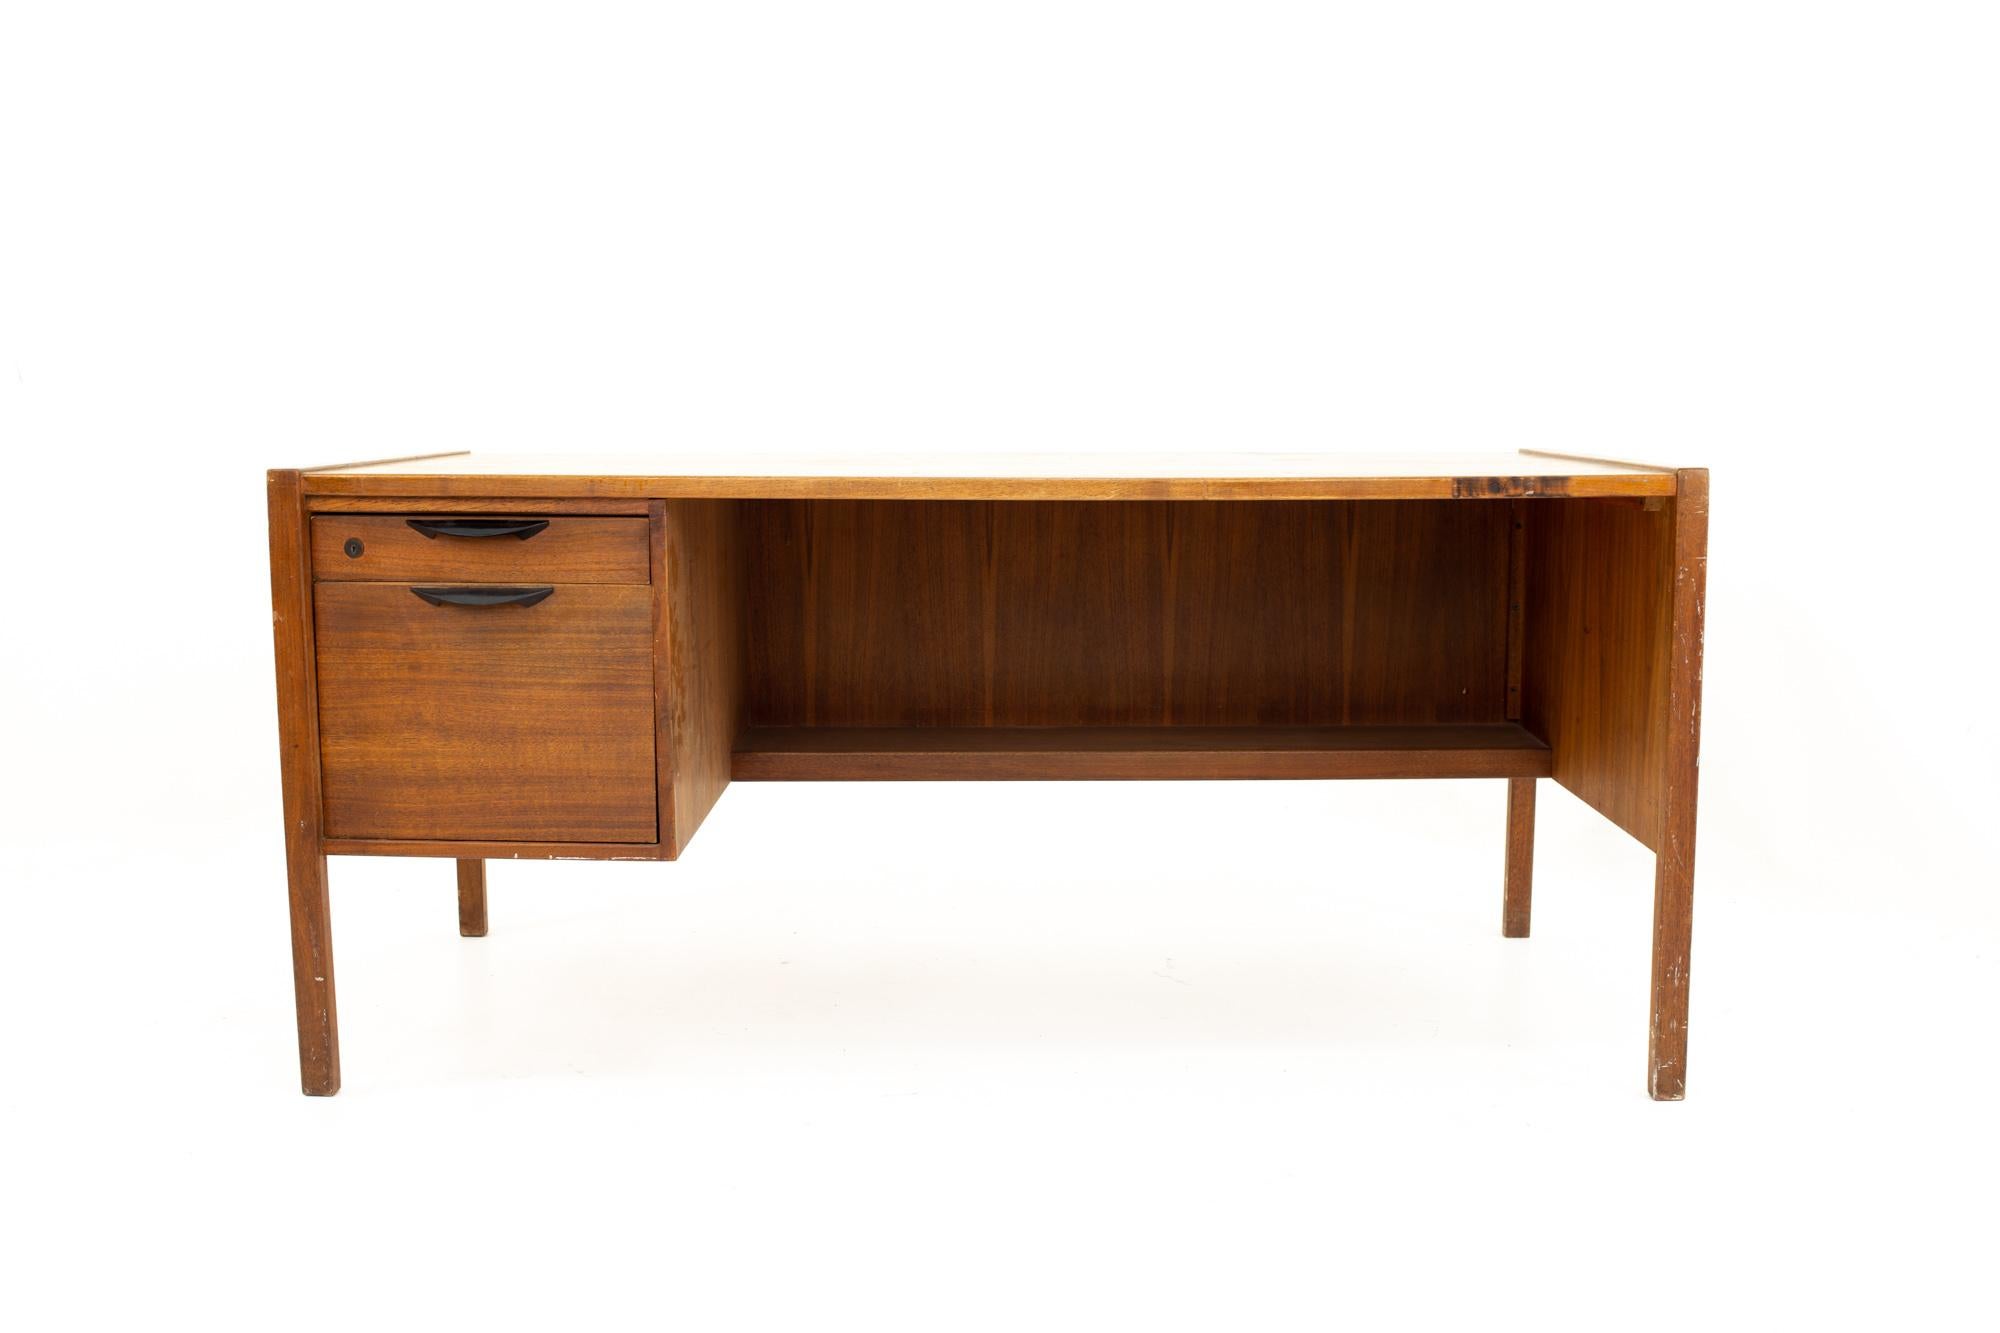 Jens Risom Mid Century walnut single sided 2-drawer desk
Desk measures: 62 wide x 28 deep x 28 high

All pieces of furniture can be had in what we call restored vintage condition. This means the piece is restored upon purchase so it’s free of